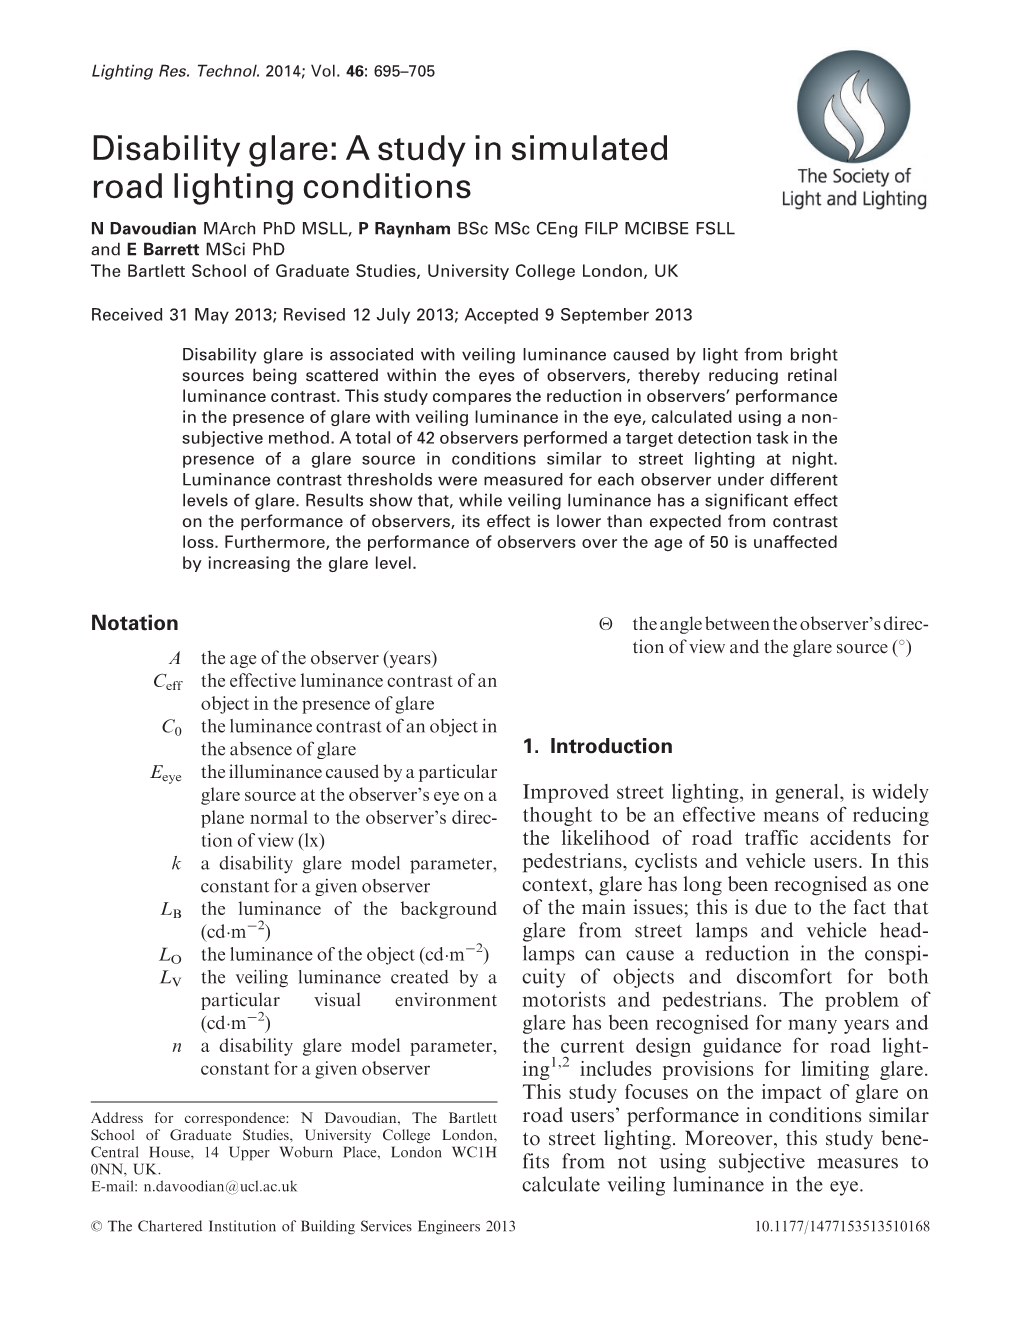 Disability Glare: a Study in Simulated Road Lighting Conditions